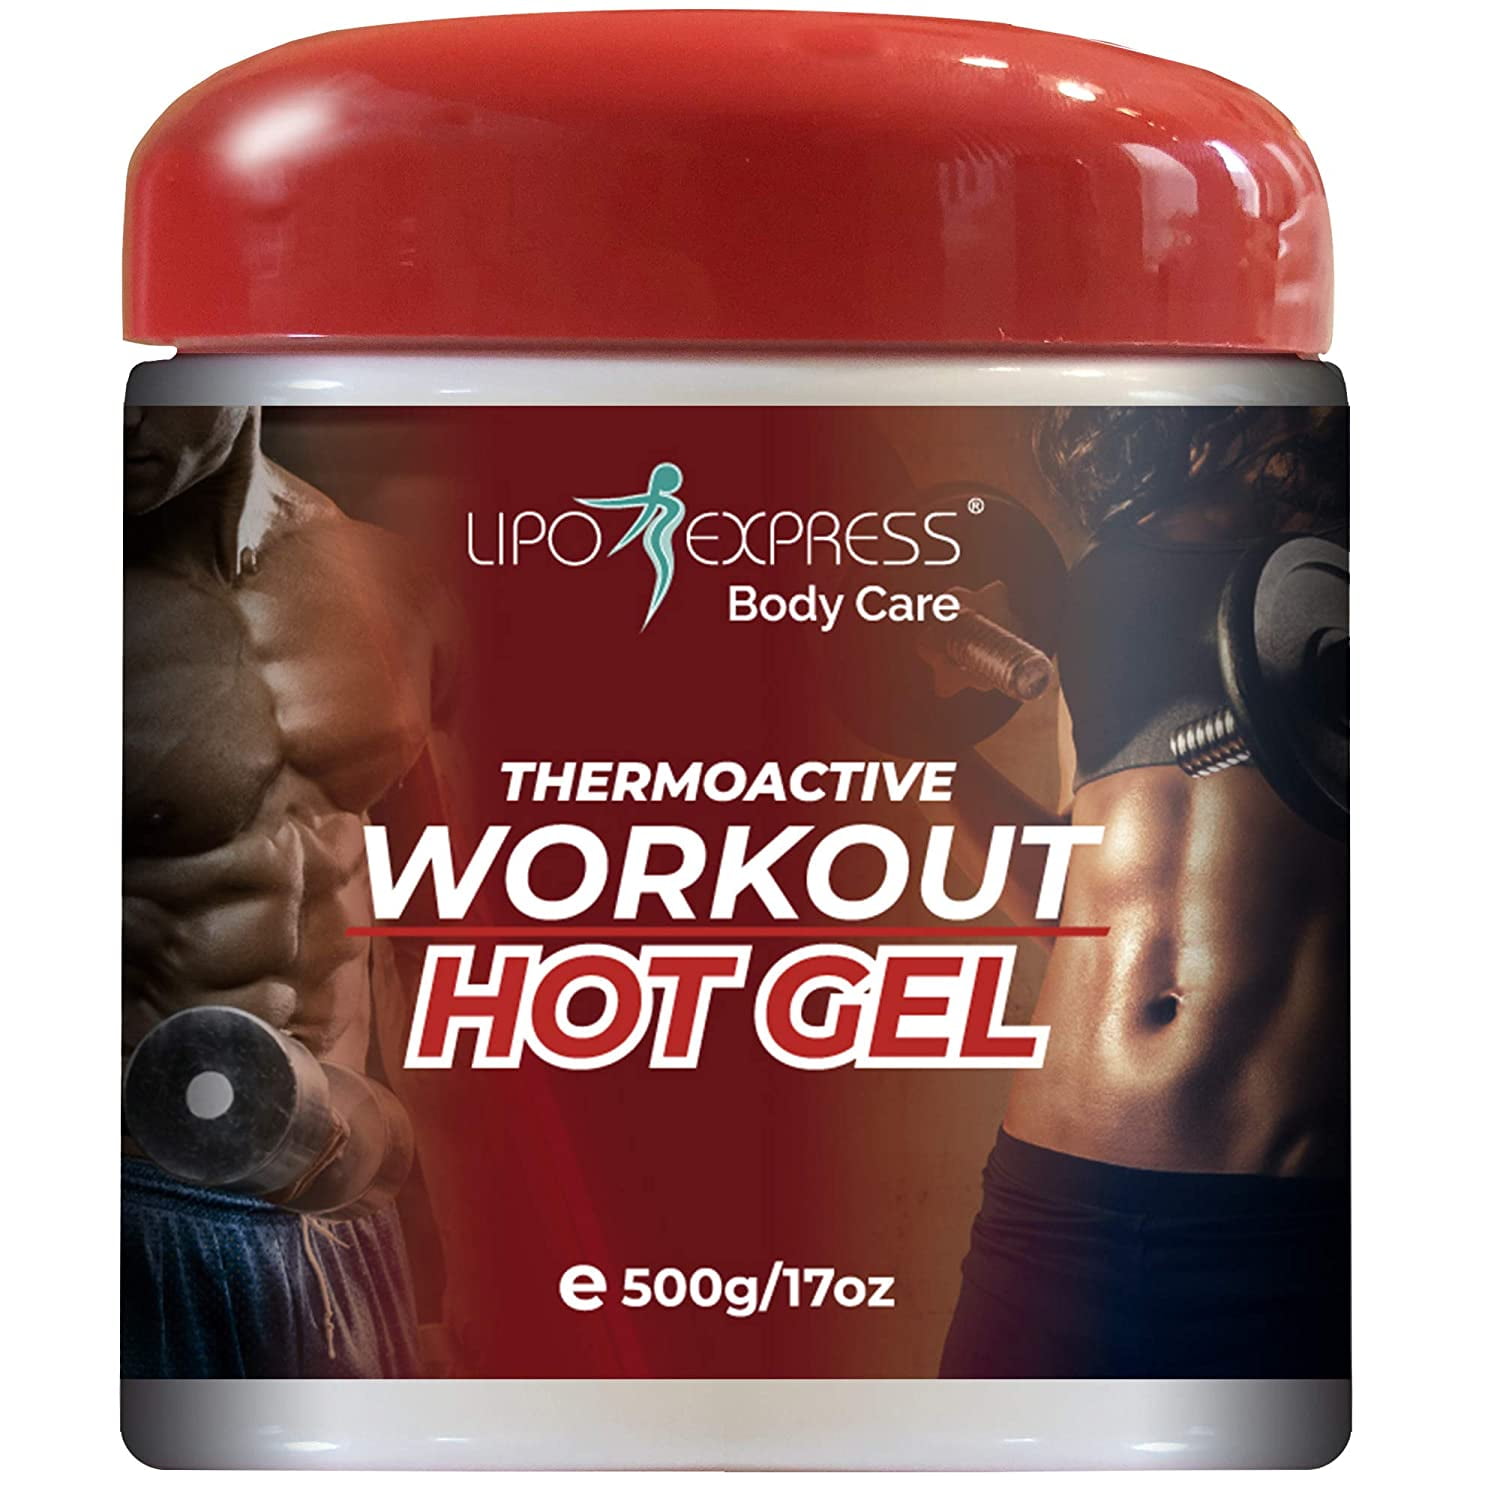 Thermoactive Hot Gel LIPO EXPRESS WORKOUT BODY CARE 500G 